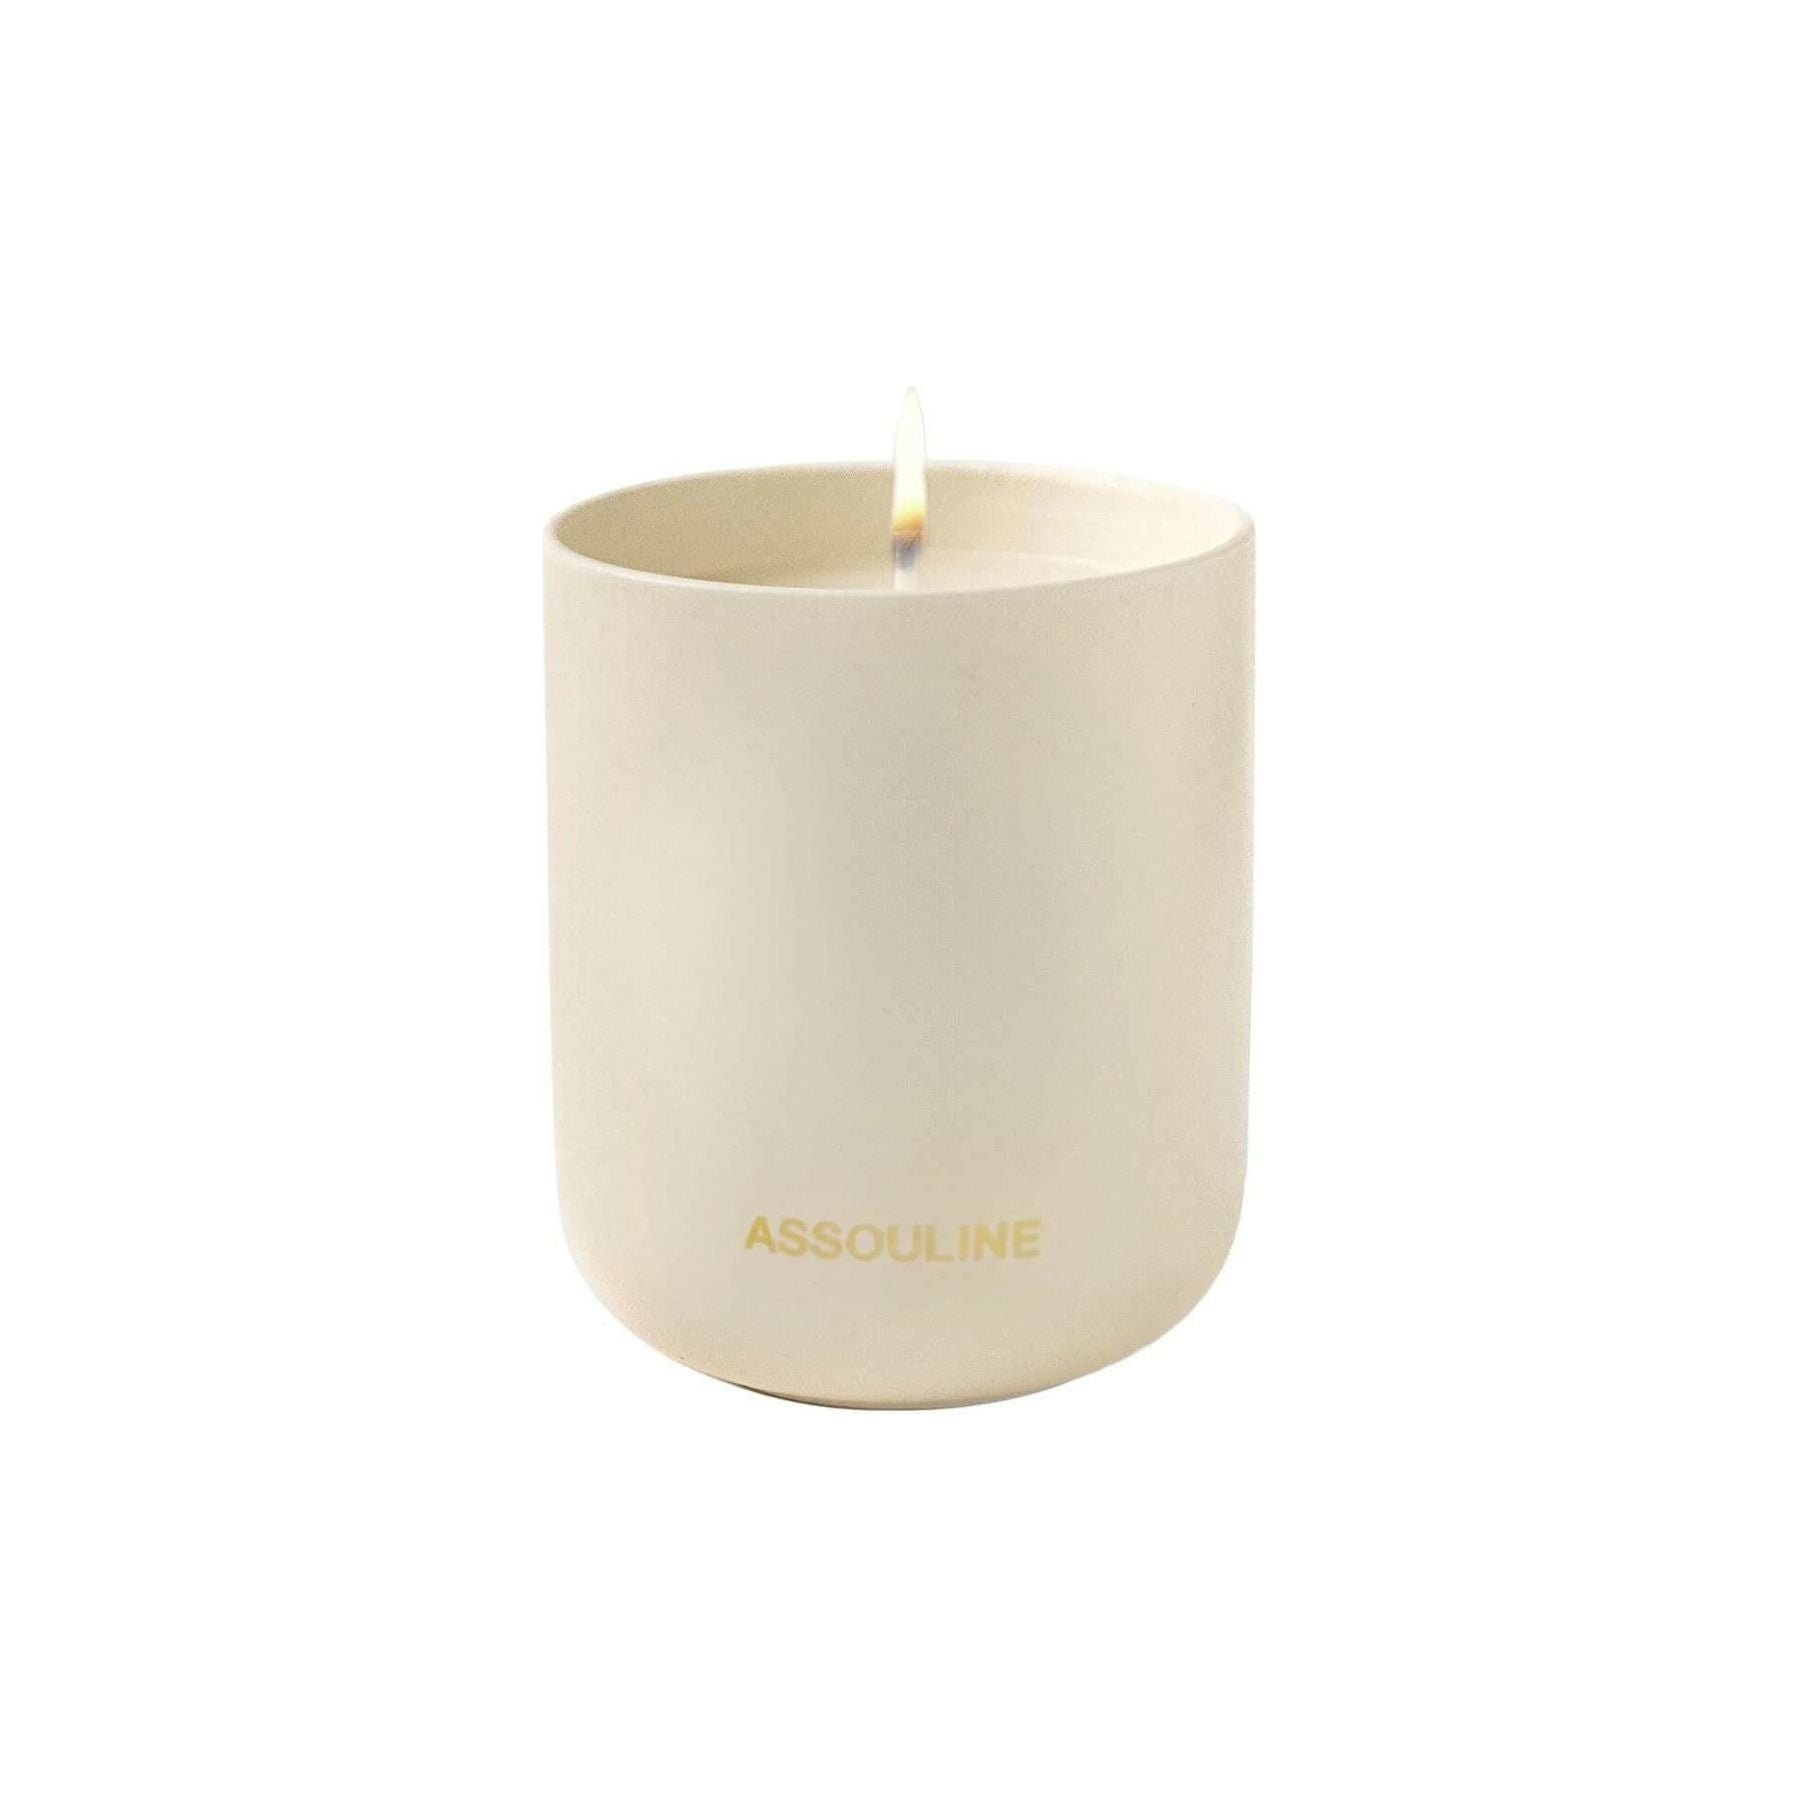 Gstaad Glam Scented Candle ASSOULINE JOHN JULIA.